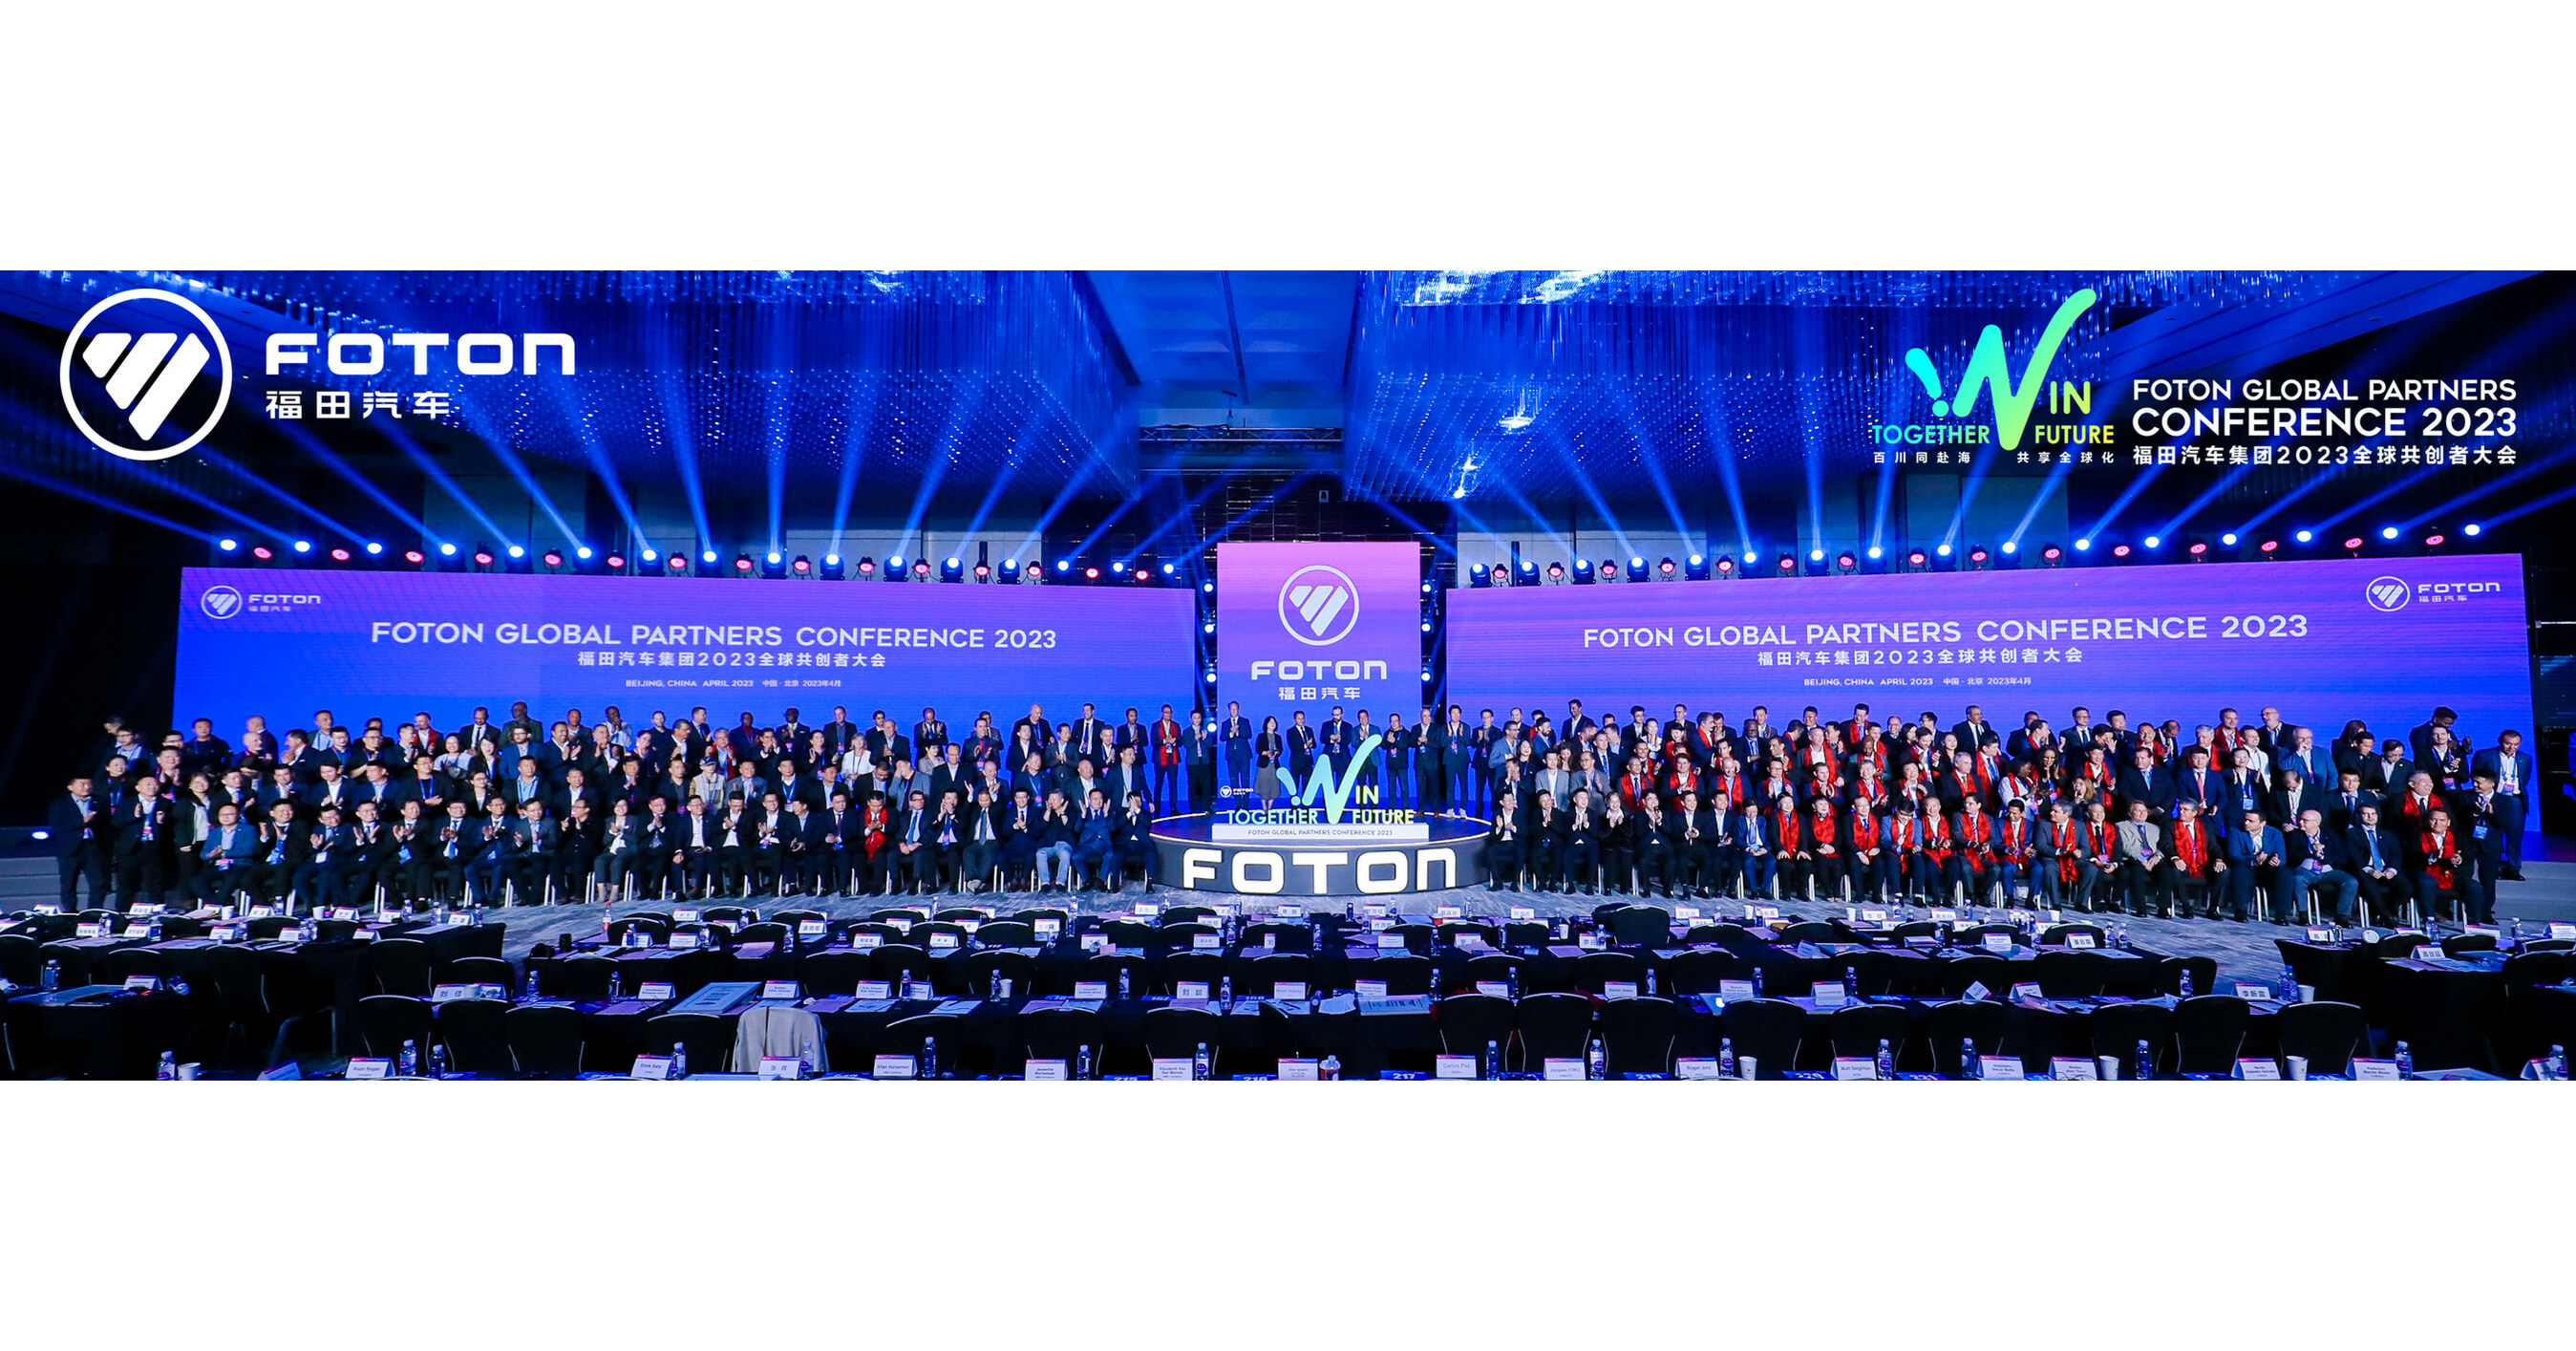 TOGETHER WIN FUTURE FOTON HELD GLOBAL PARTNER CONFERENCE AT BEIJING CHINA